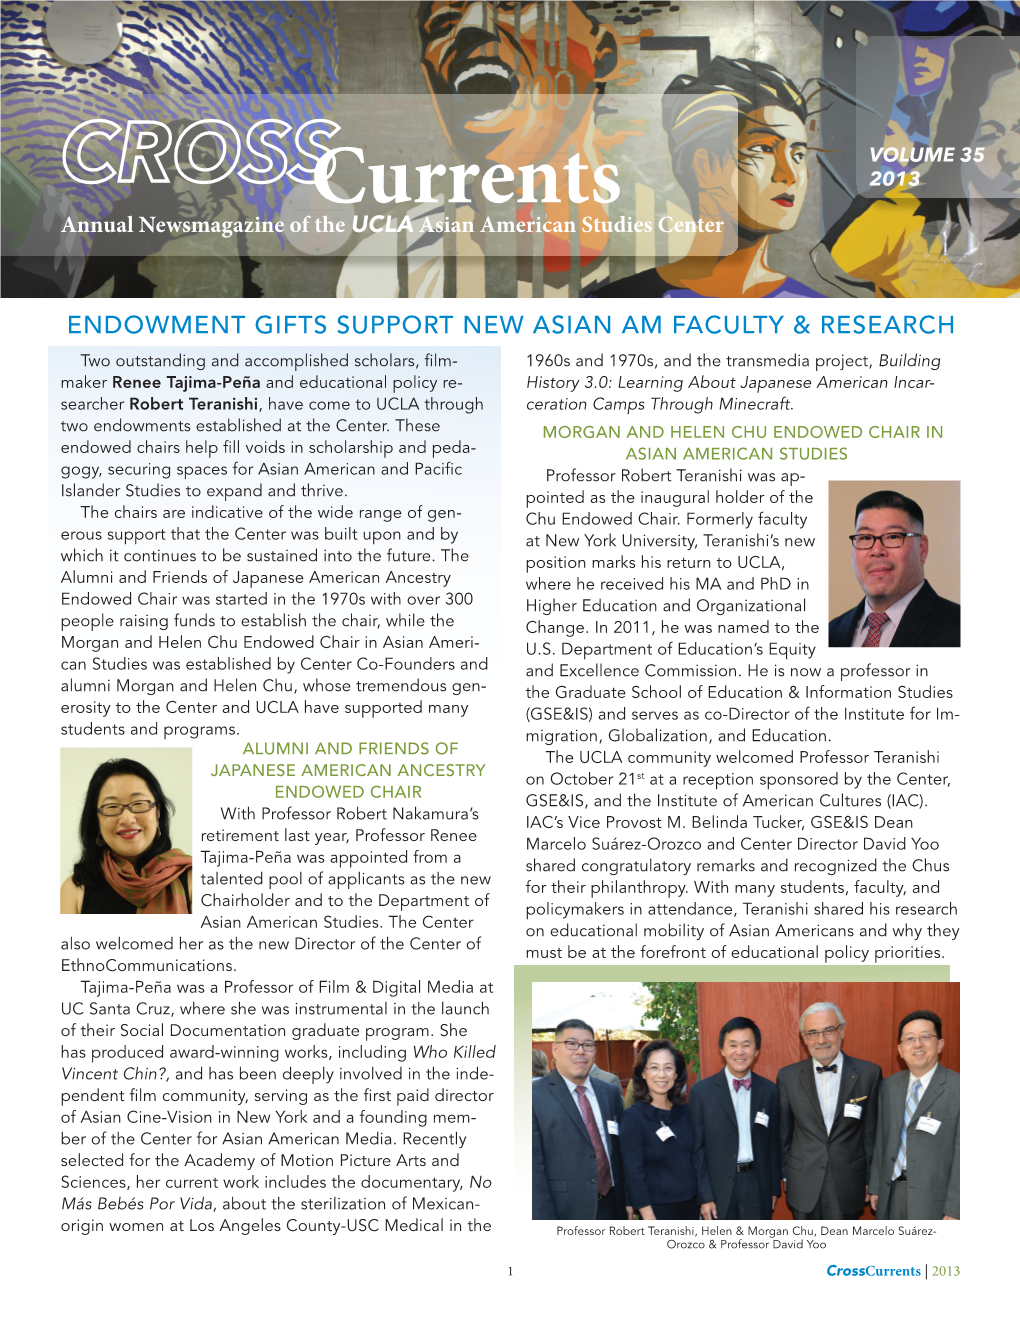 Currents 2013 Annual Newsmagazine of the UCLA Asian American Studies Center